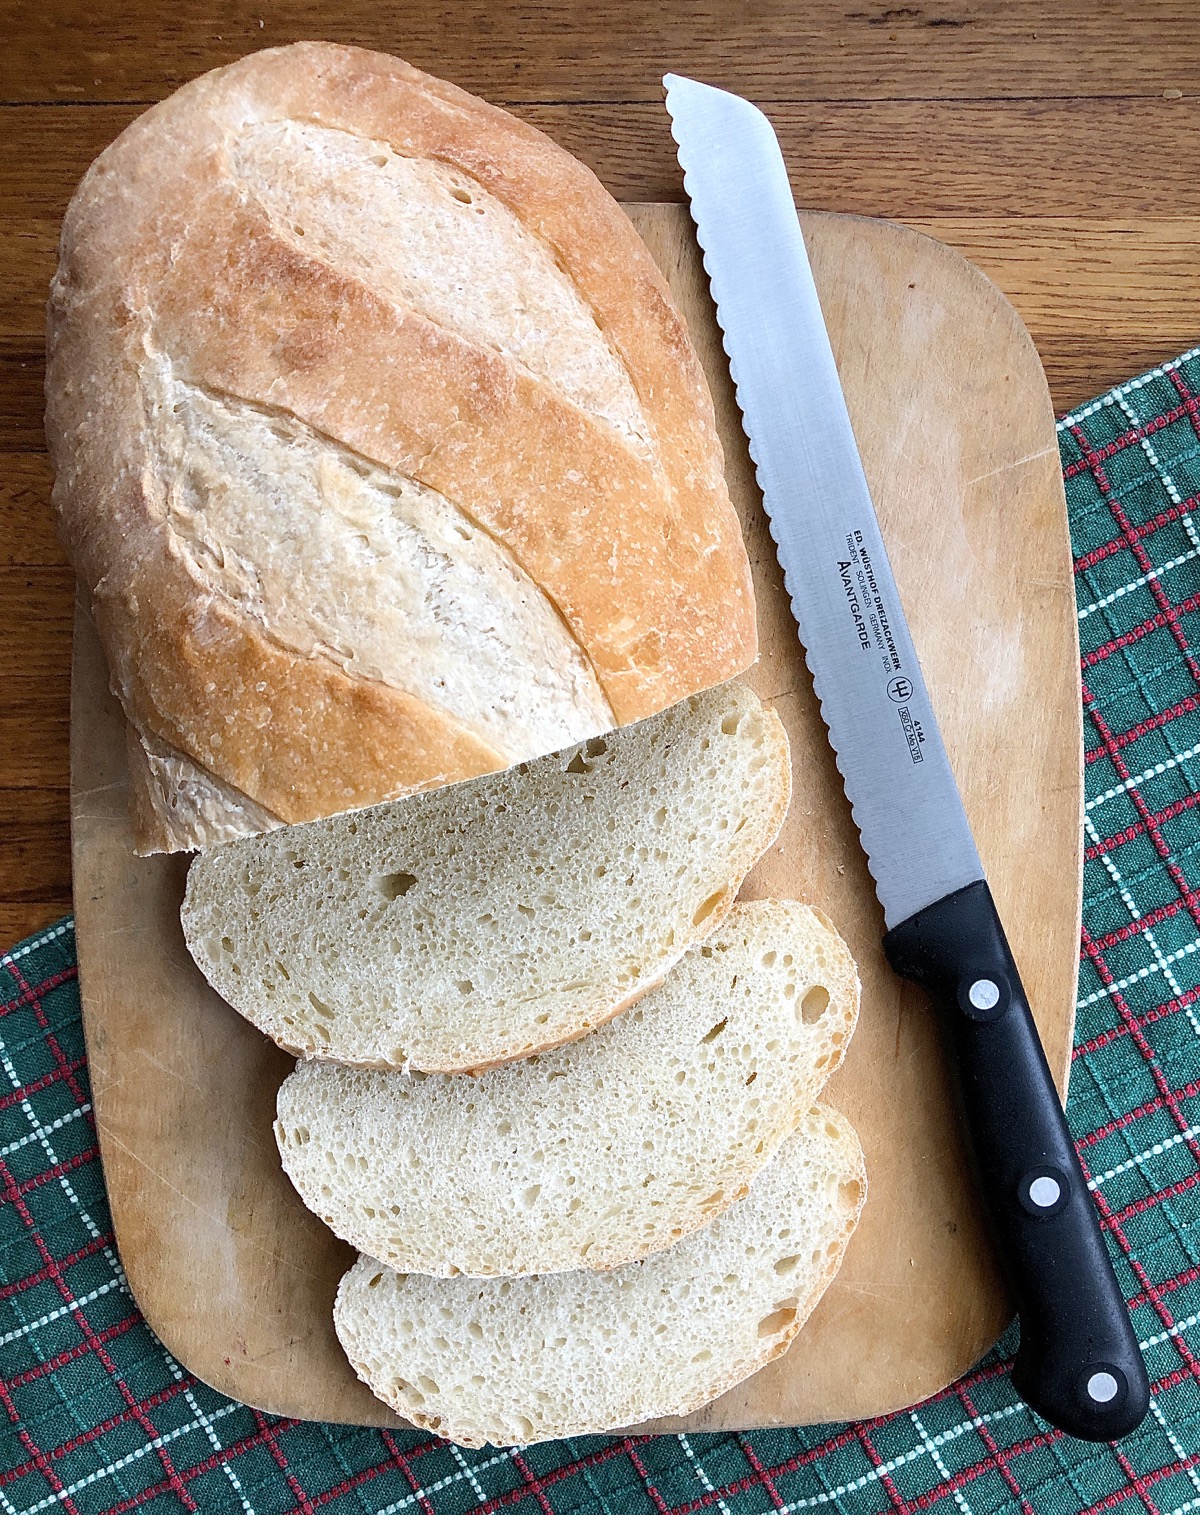 Loaf of hearth bread on a cutting board, partially sliced, serrated knife alongside.